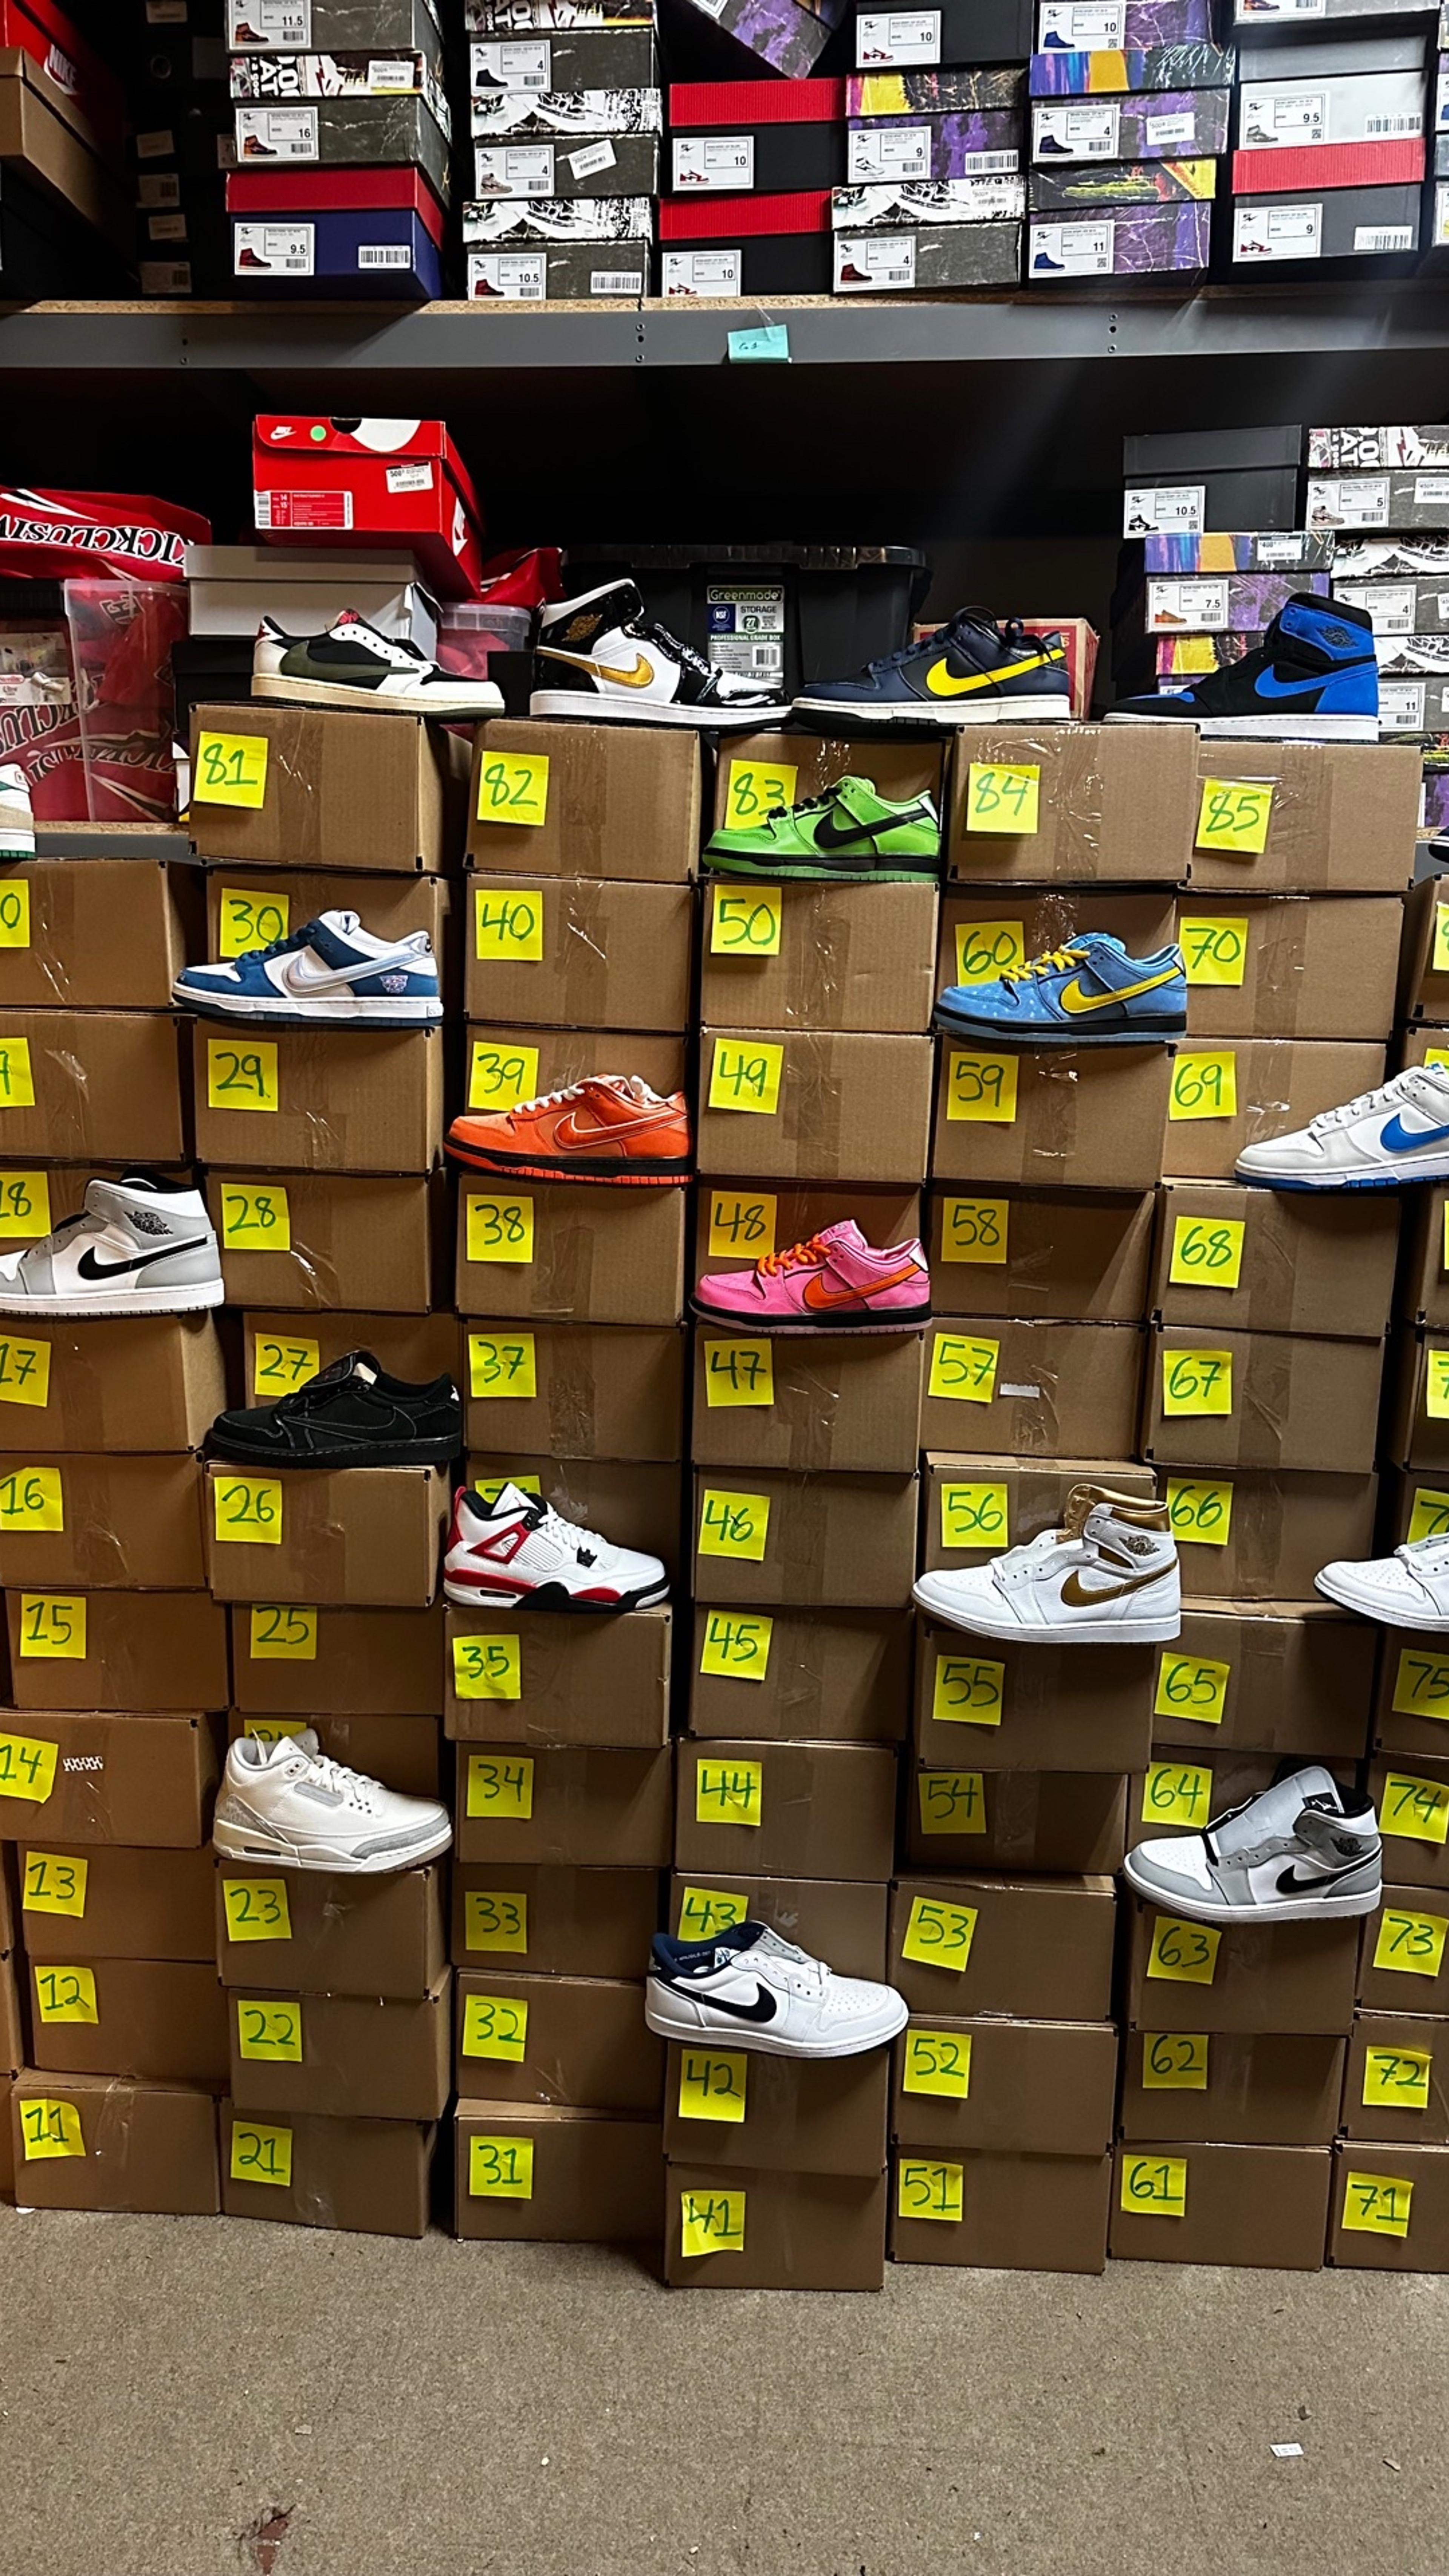 Preview image for the show titled "Every box has sneakers! Over $20,000 in hype sneakers " at Today @ 11:00 PM